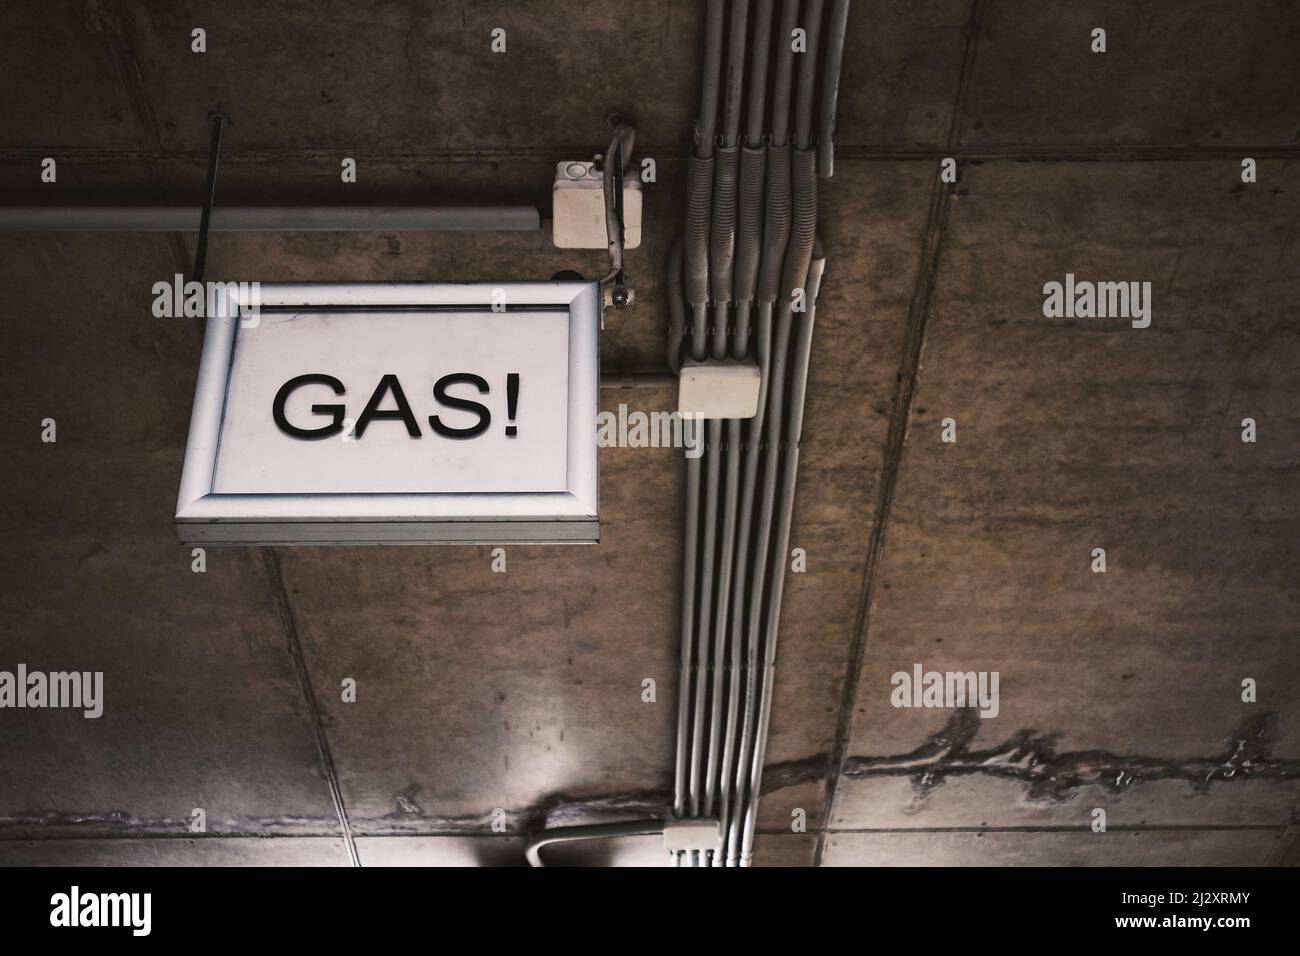 Ceiling infrastructure in the garage with gas sign, details. Stock Photo